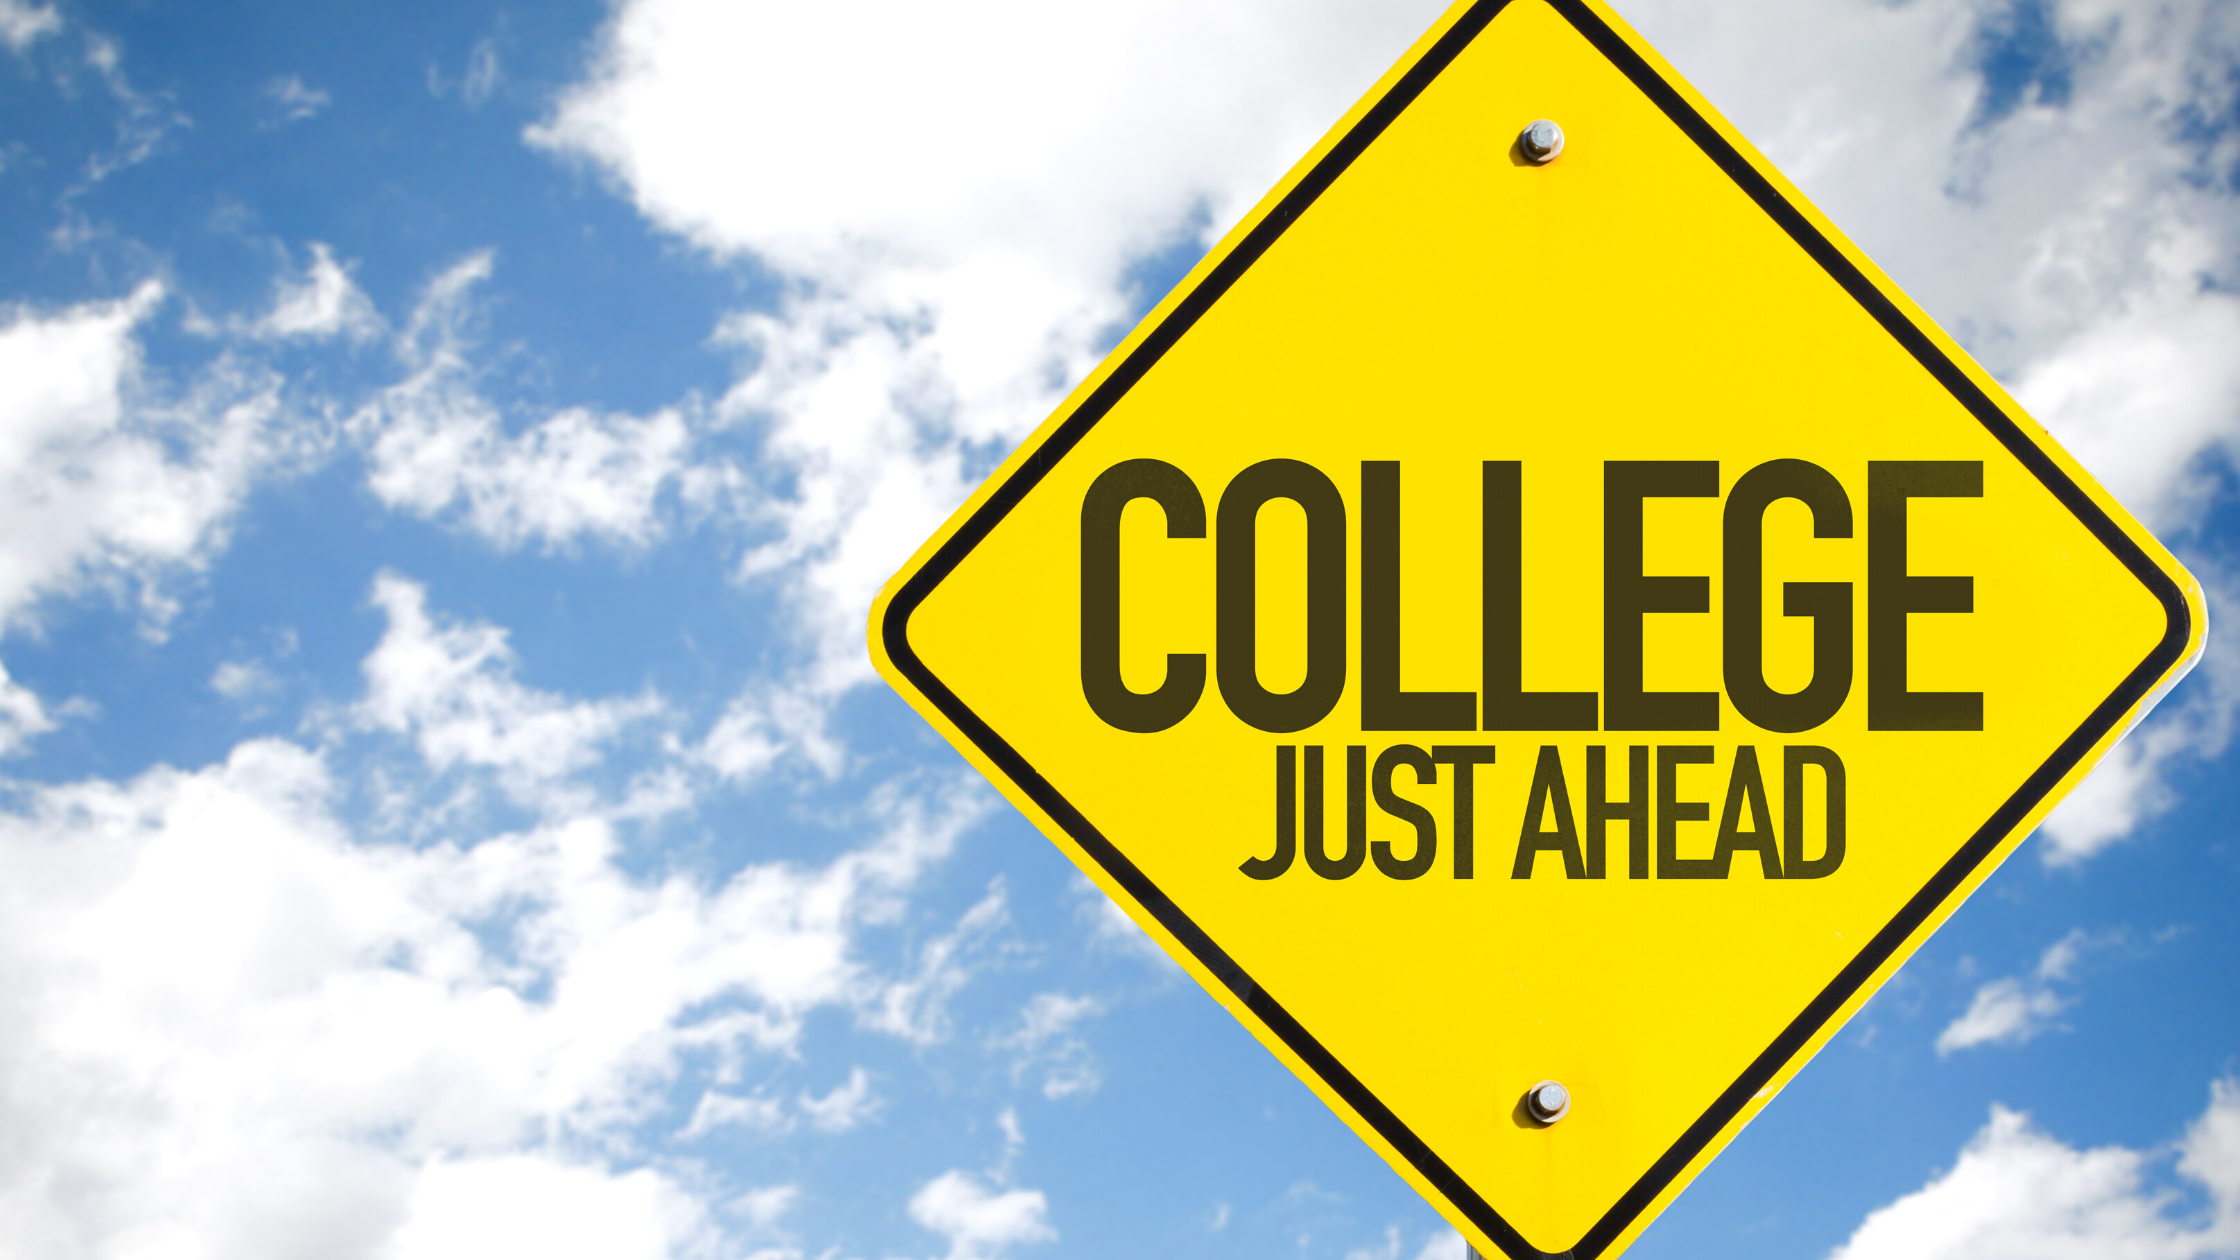 Are Your Kids Really Ready To Head To College Right Now?